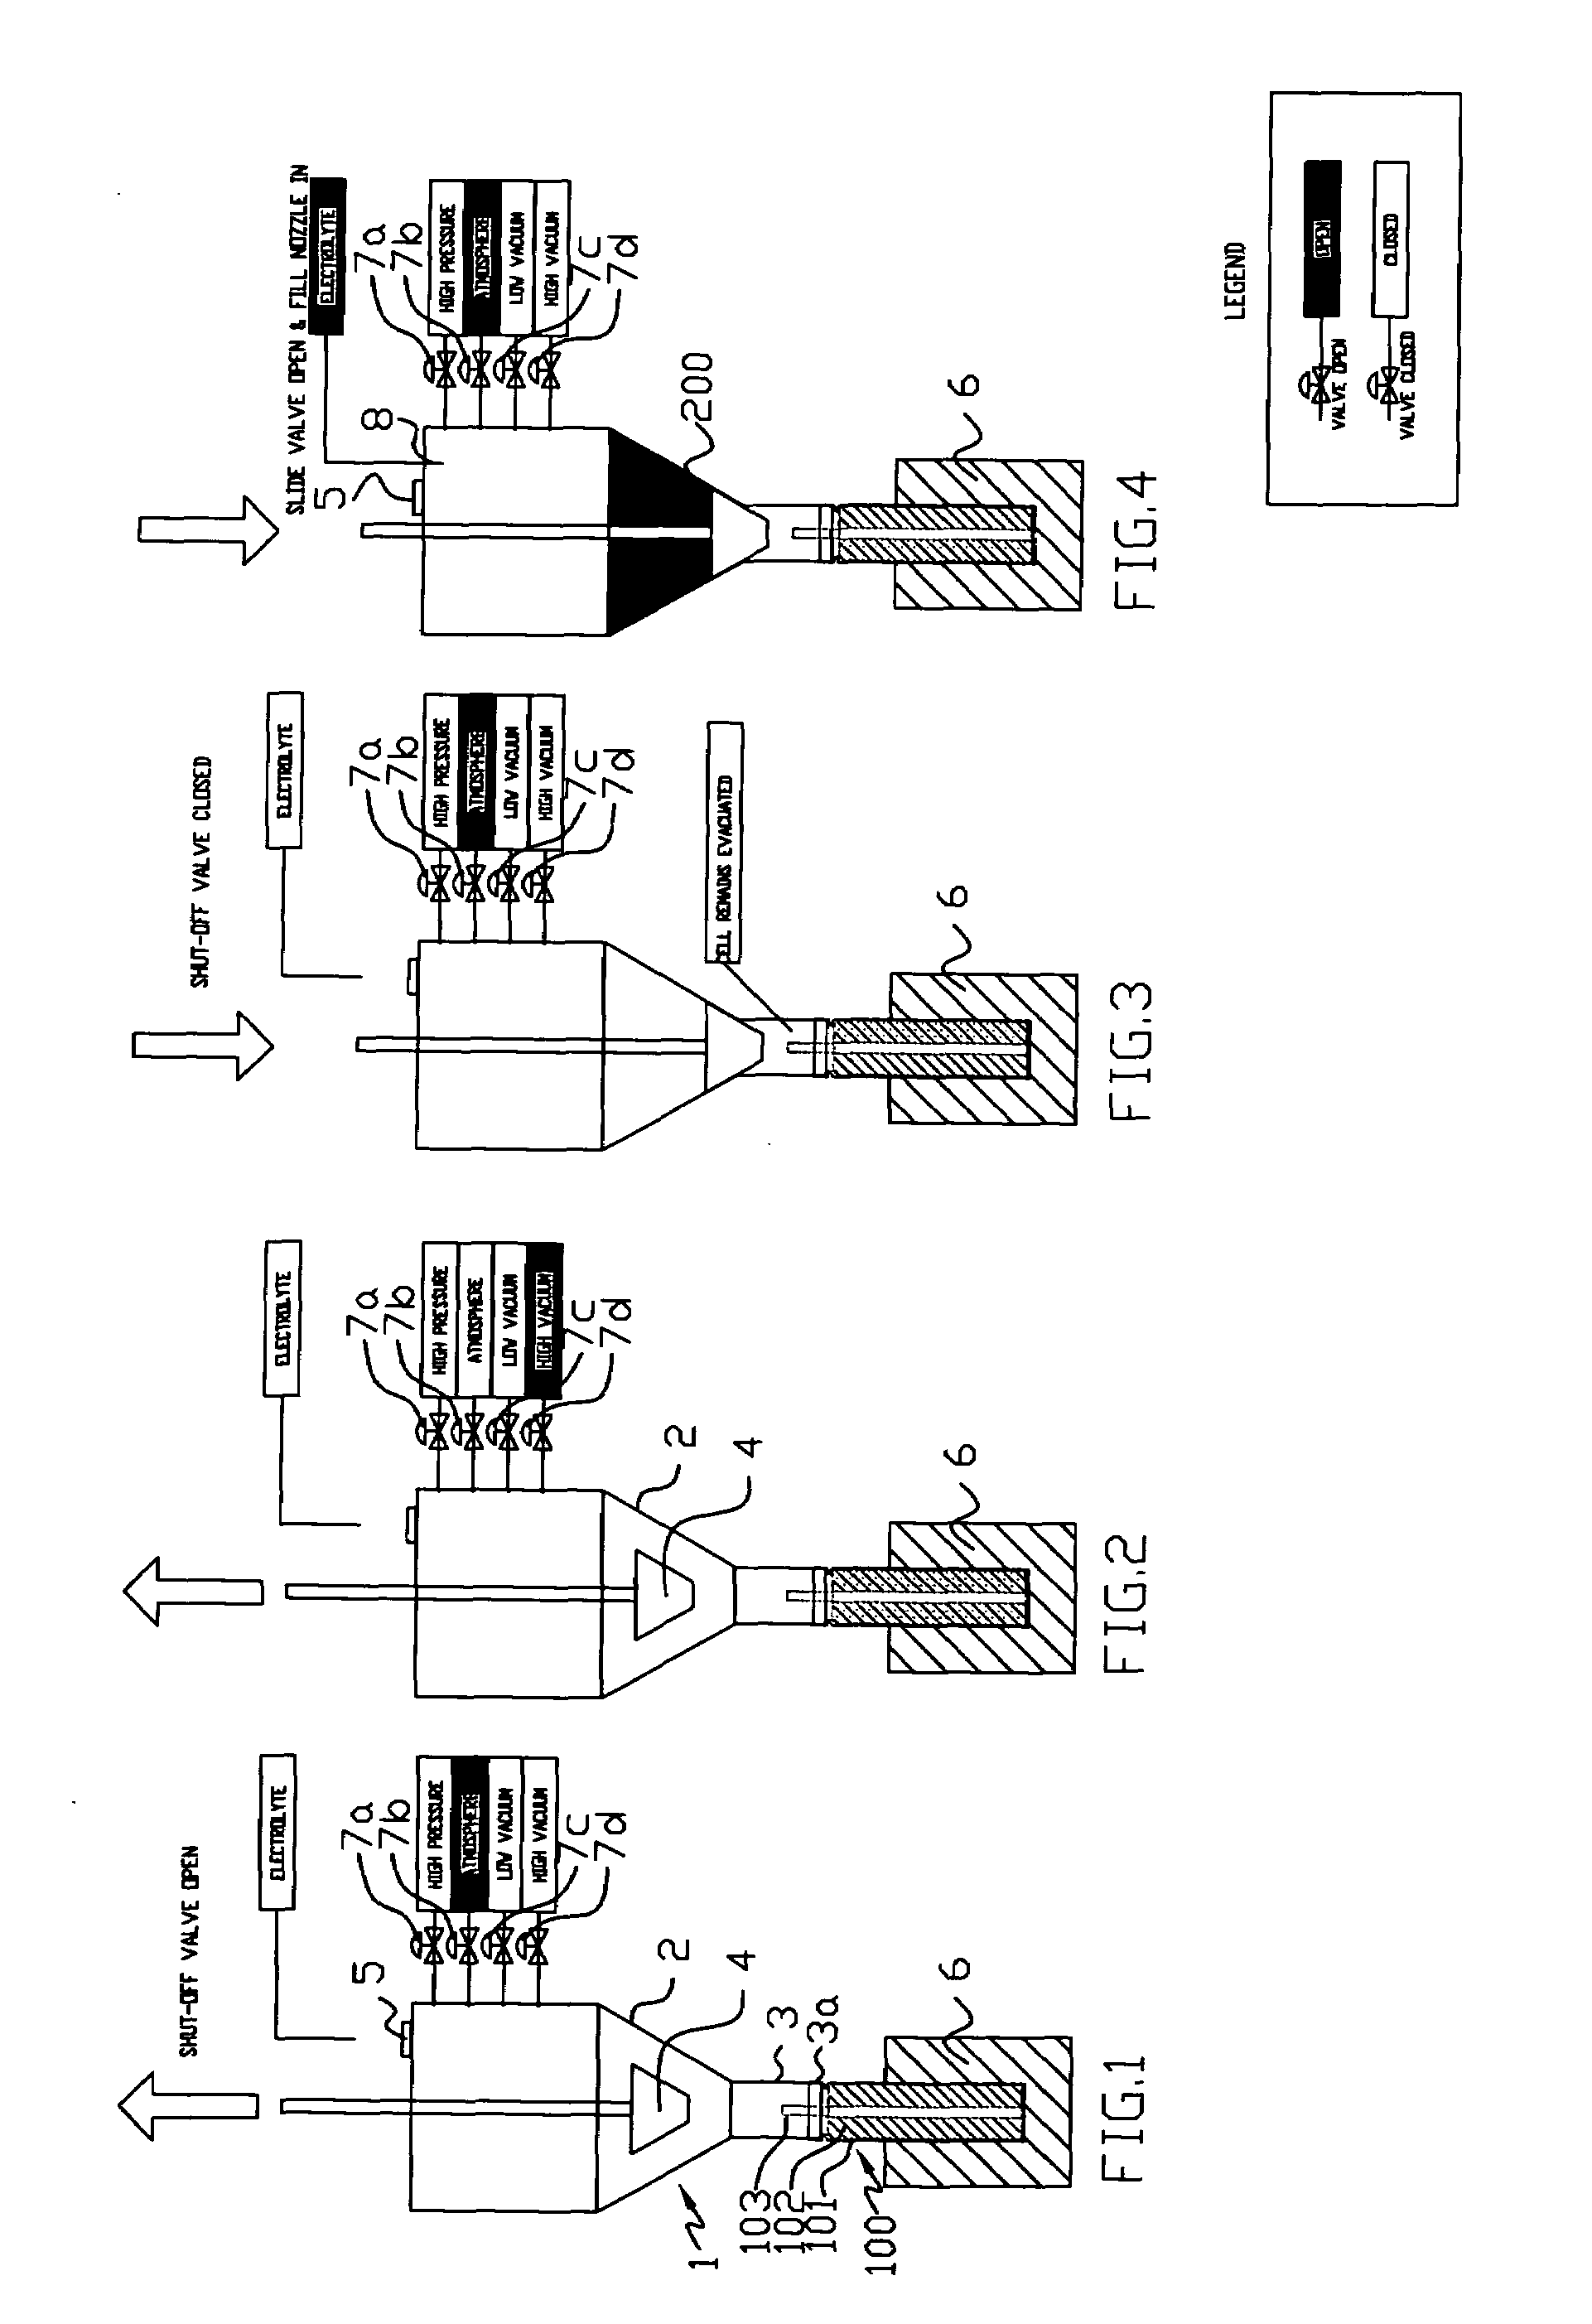 Method for filling electrolyte into battery cell and apparatus for carrying out the method